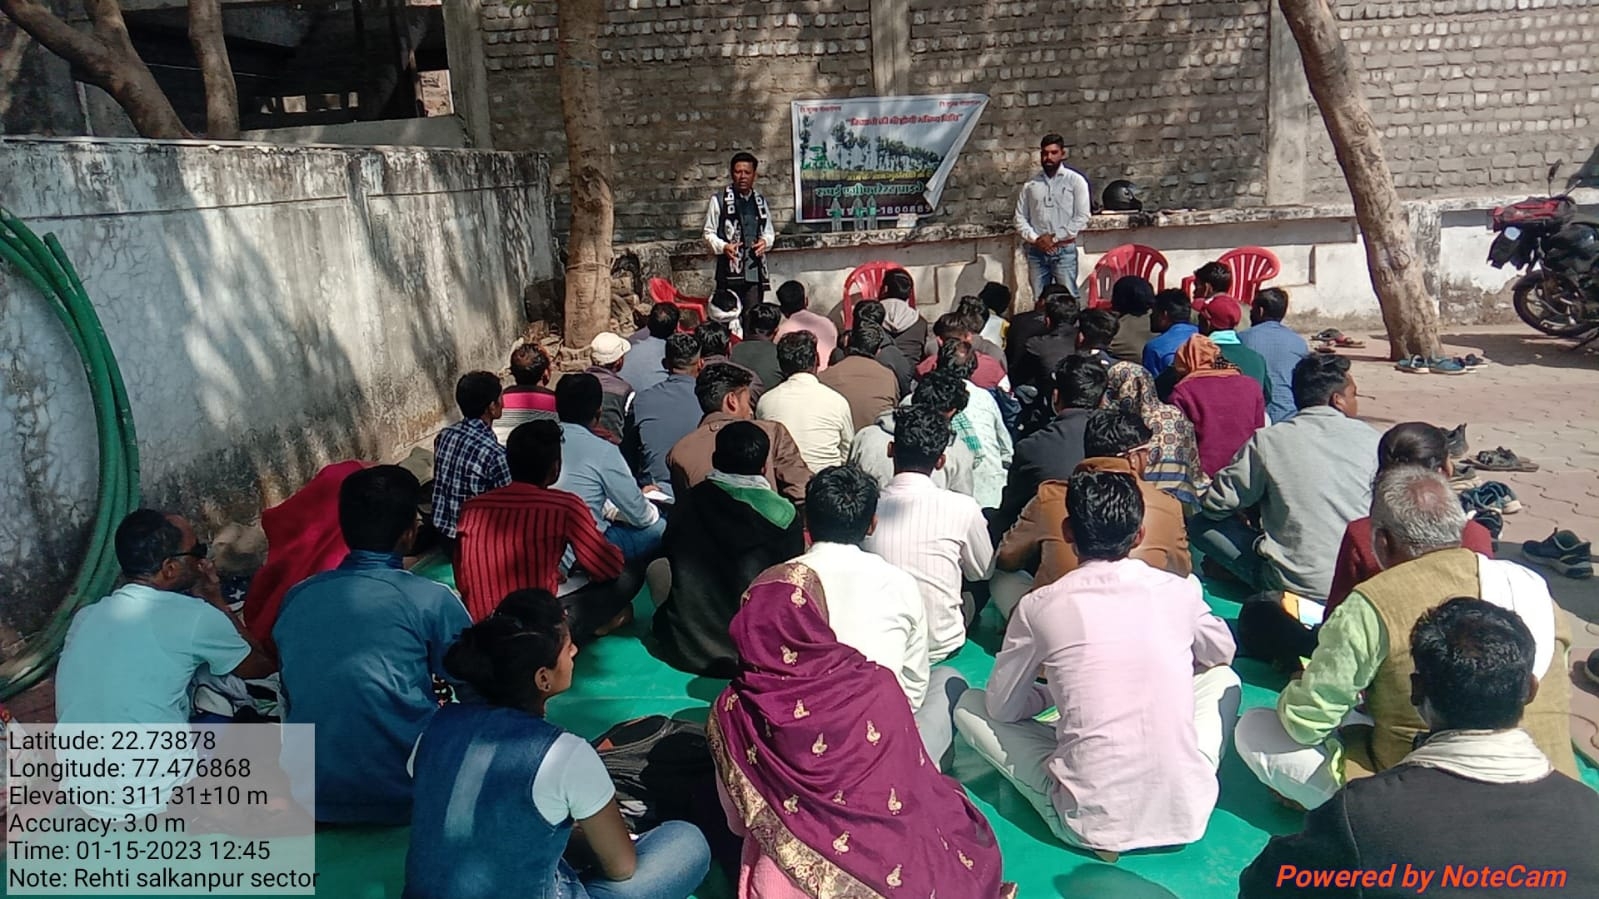 Today, on January 15, 2023, in village Salkanpur of Rehti tehsil of Sehore district, Sanjay Choudhary, director of Roopai Agri Forest Pvt., made farmers aware about free tree planting and how the environment around them can be cleaned through this scheme